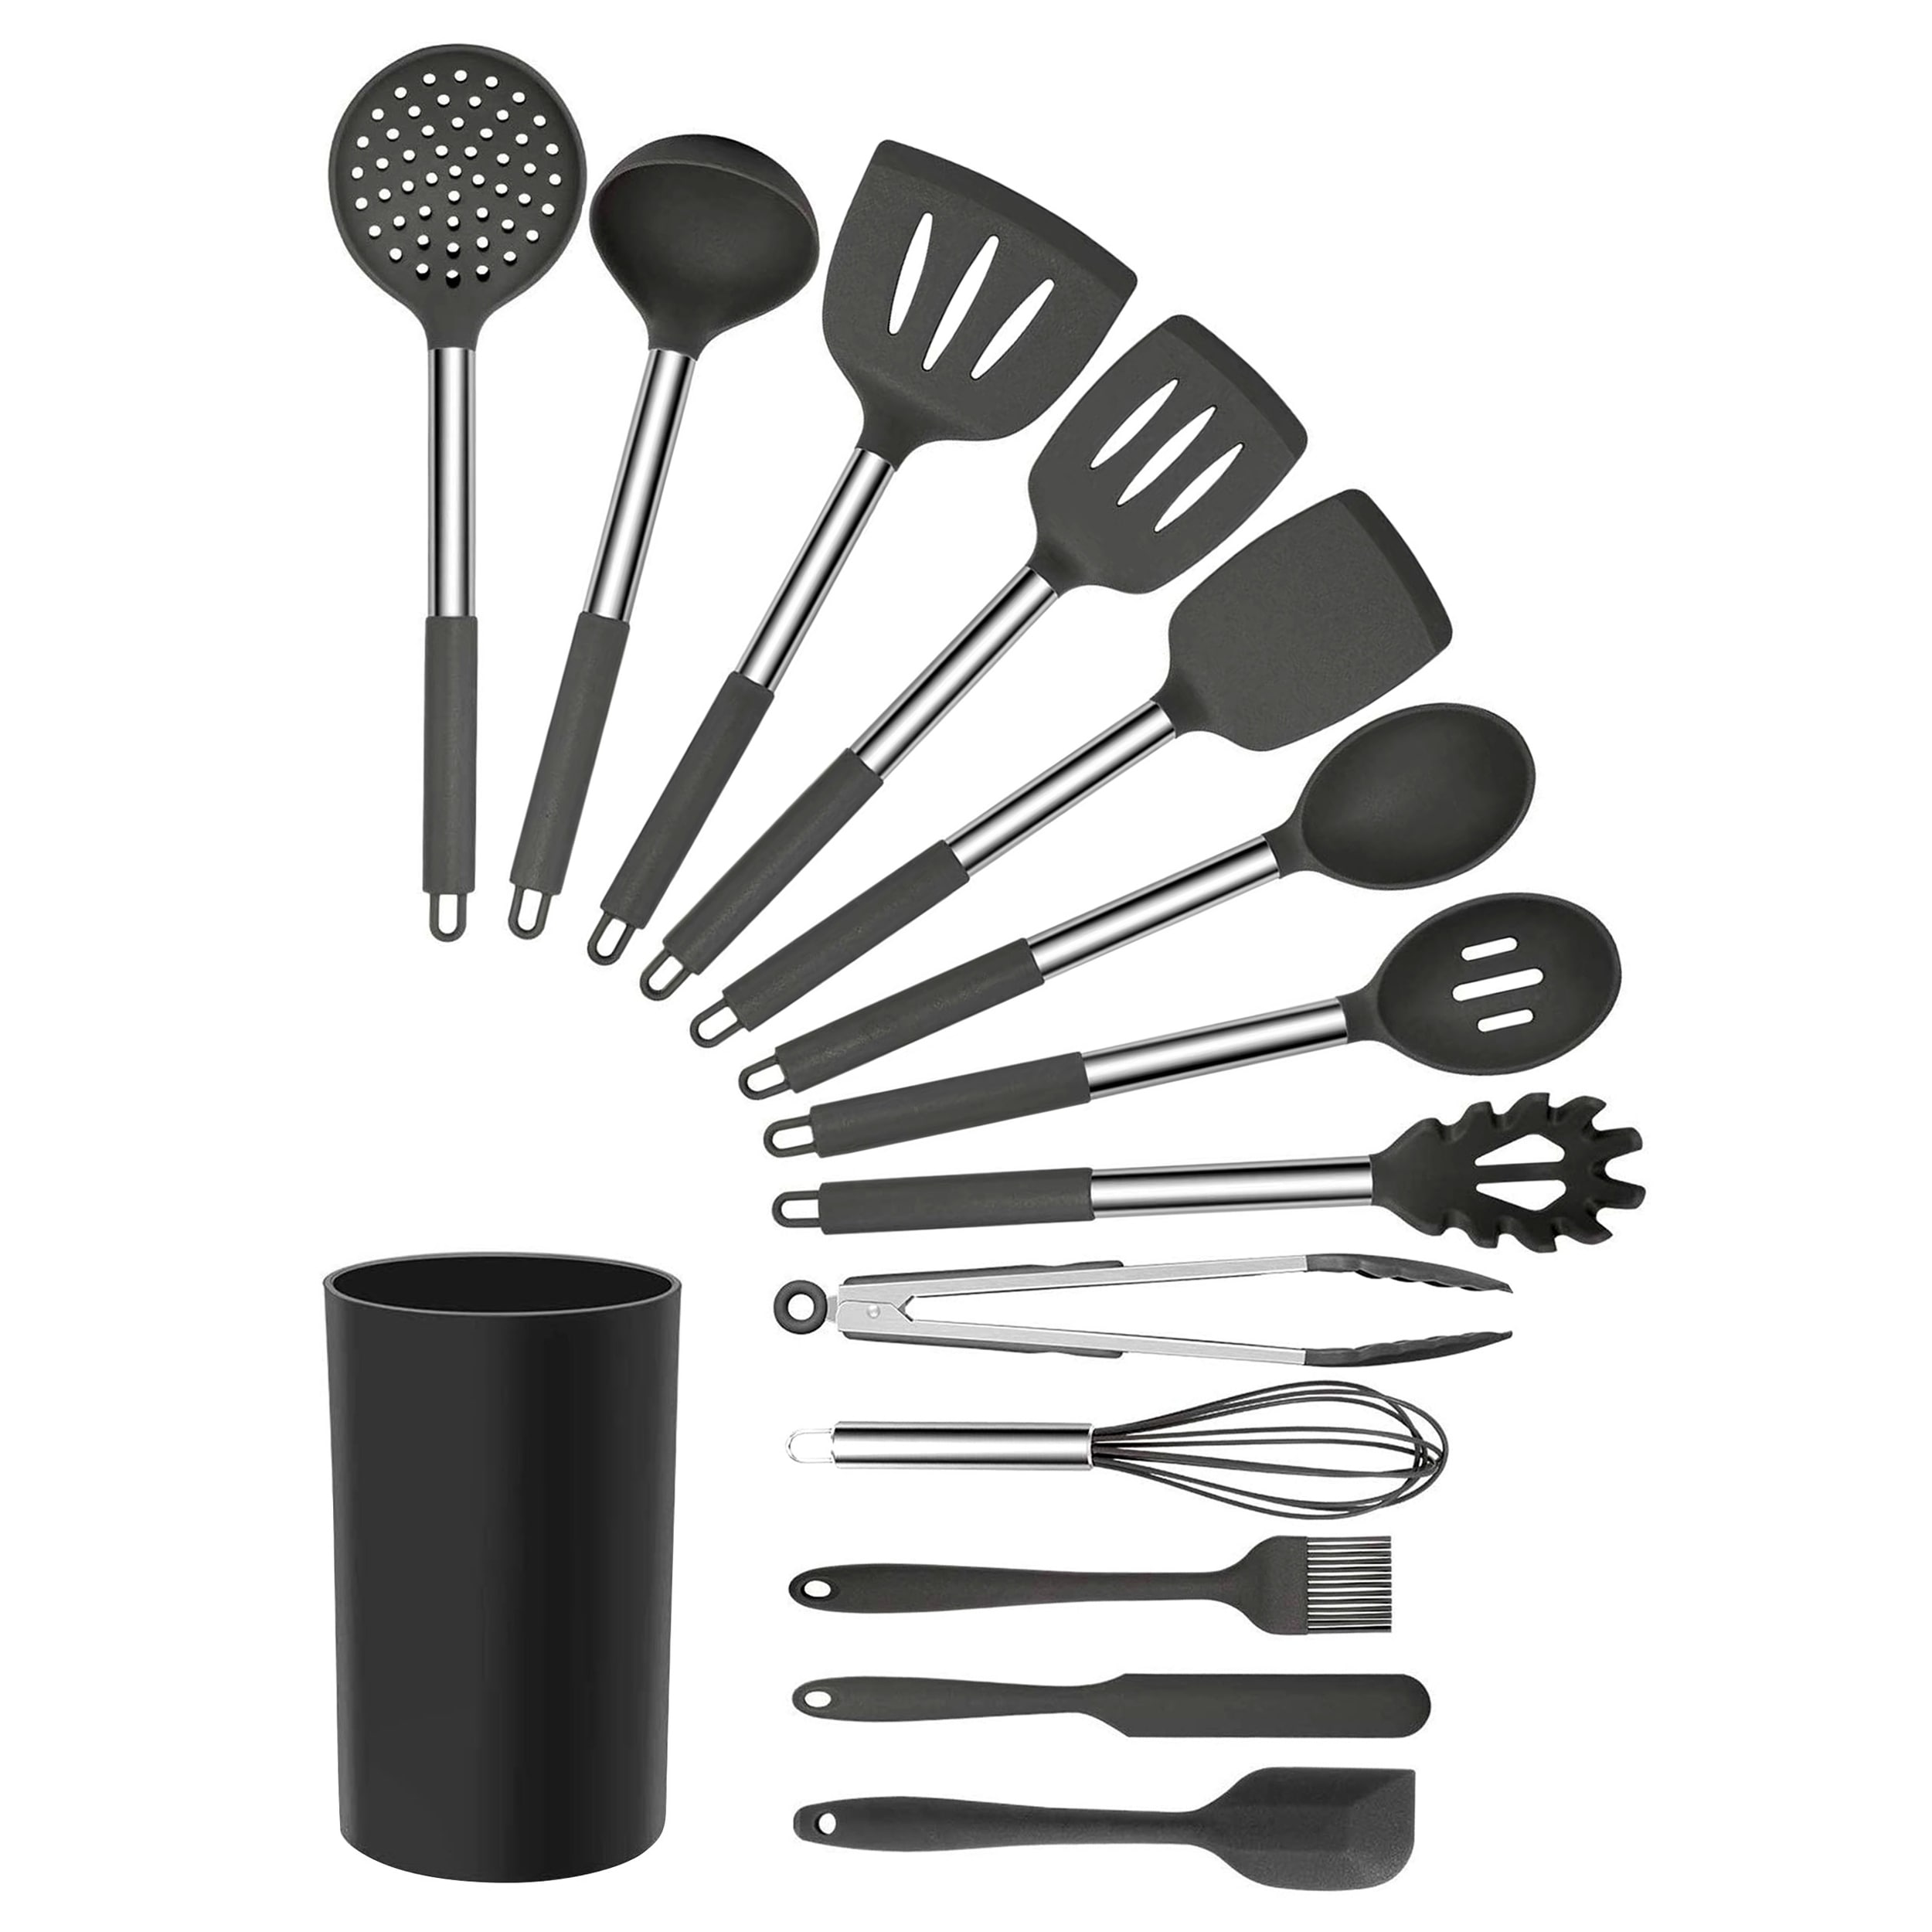 https://ak1.ostkcdn.com/images/products/is/images/direct/0ad0976daed4da31178a72a262e1d3393df29c86/MegaChef-14Pc-Silicone-and-Stainless-Steel-Kitchen-Utensil-Set-in-Gray.jpg